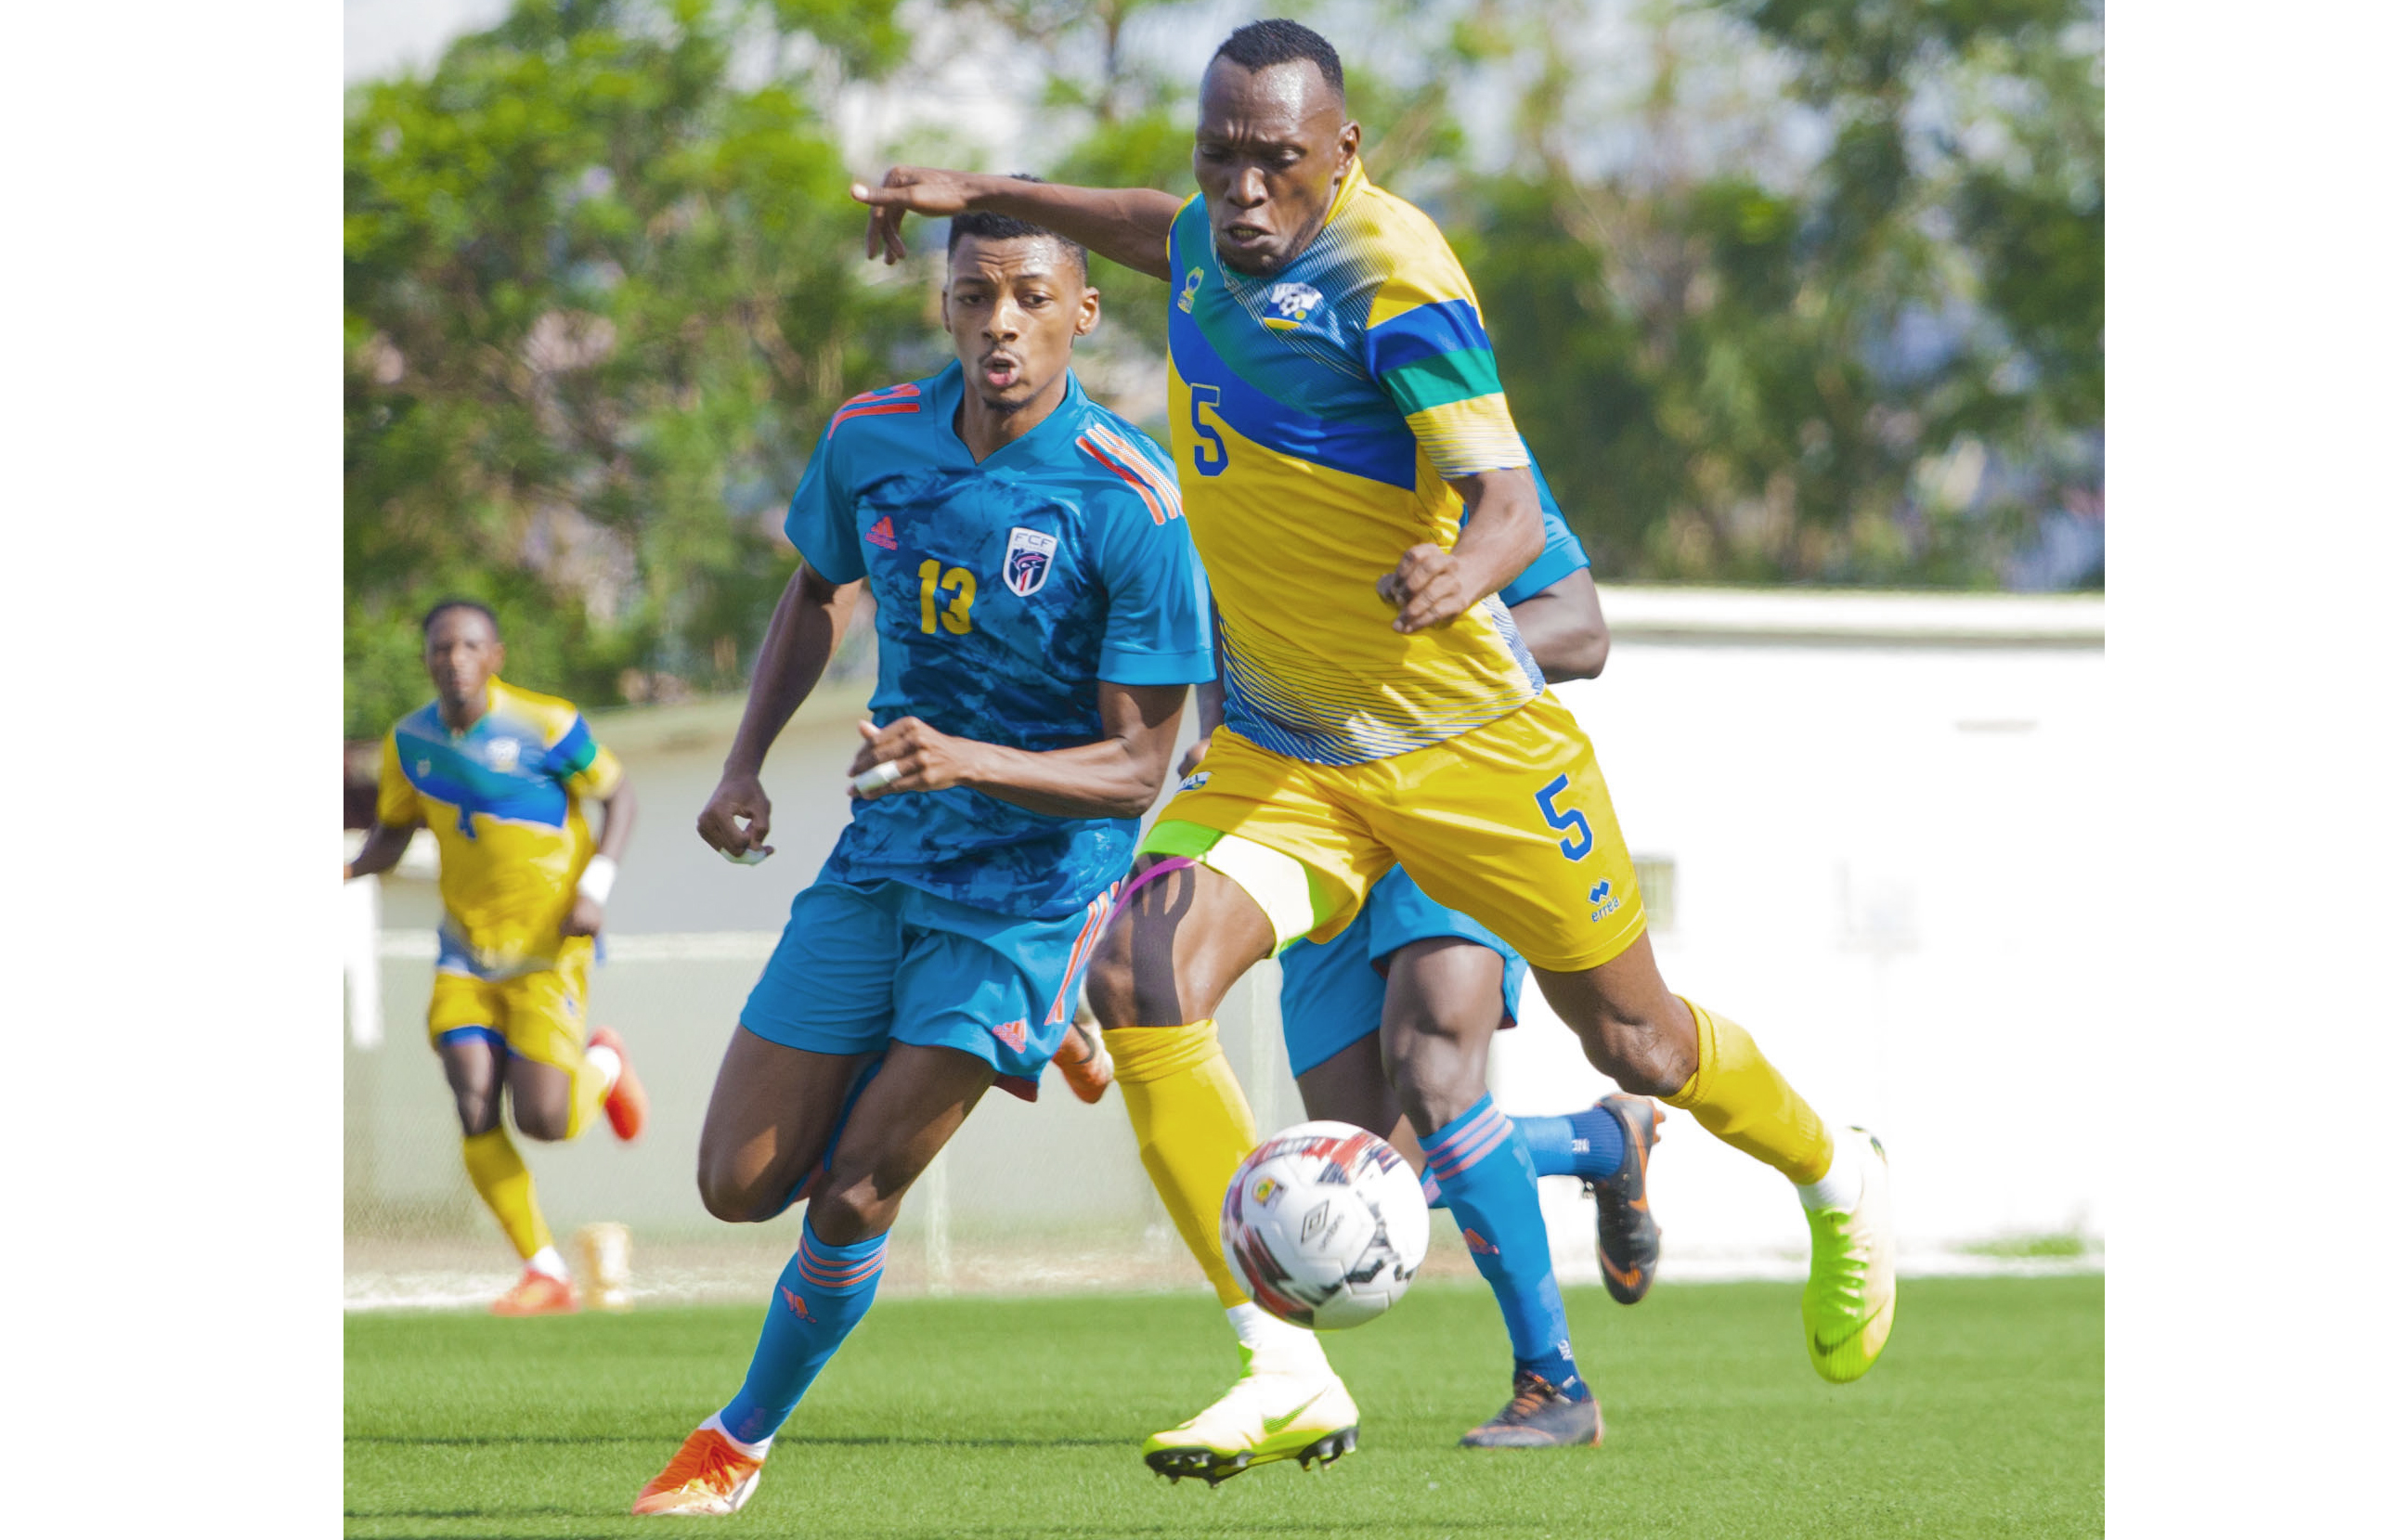 Amavubi striker Meddie Kagere dribbles past Cape Verde defender Nuno Borges during a goalless draw between the National team and Cape Verde at Kigali stadium in Nyamirambo on Tuesday, 17 November 2020.Photo by Hardi Uwihanganye